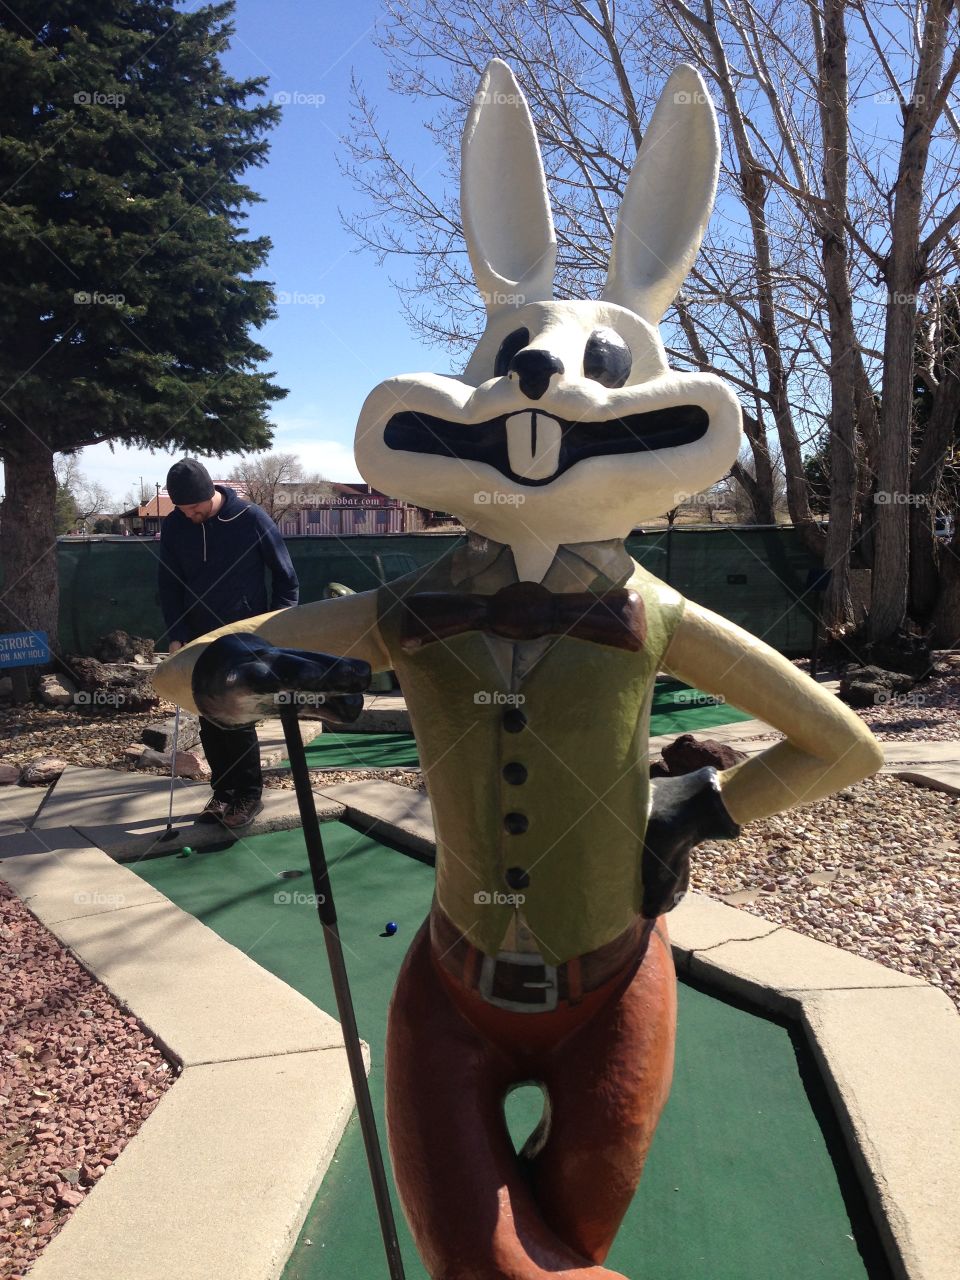 Down the Rabbit Hole. A rabbit statue at Hitt's Miniature Golf in Colorado Springs, CO